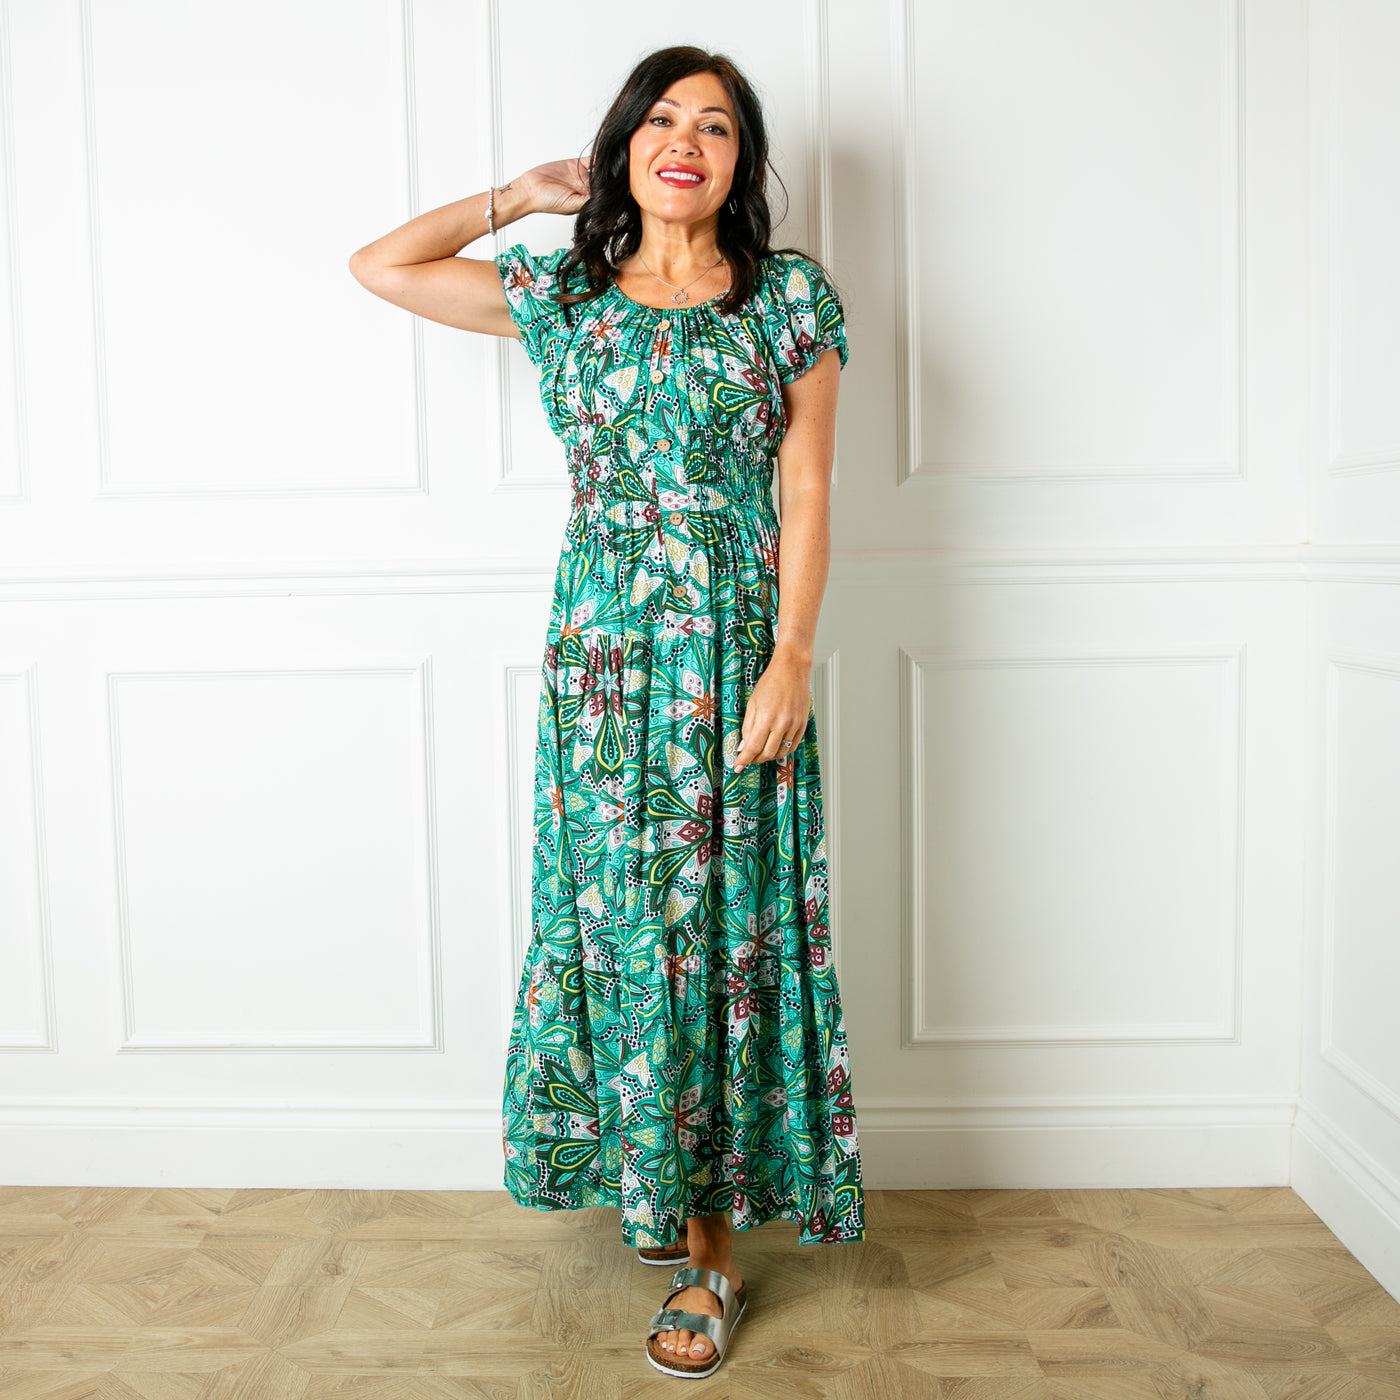 The green Printed Button Maxi Dress with a maxi tiered skirt in a fun summery pattern